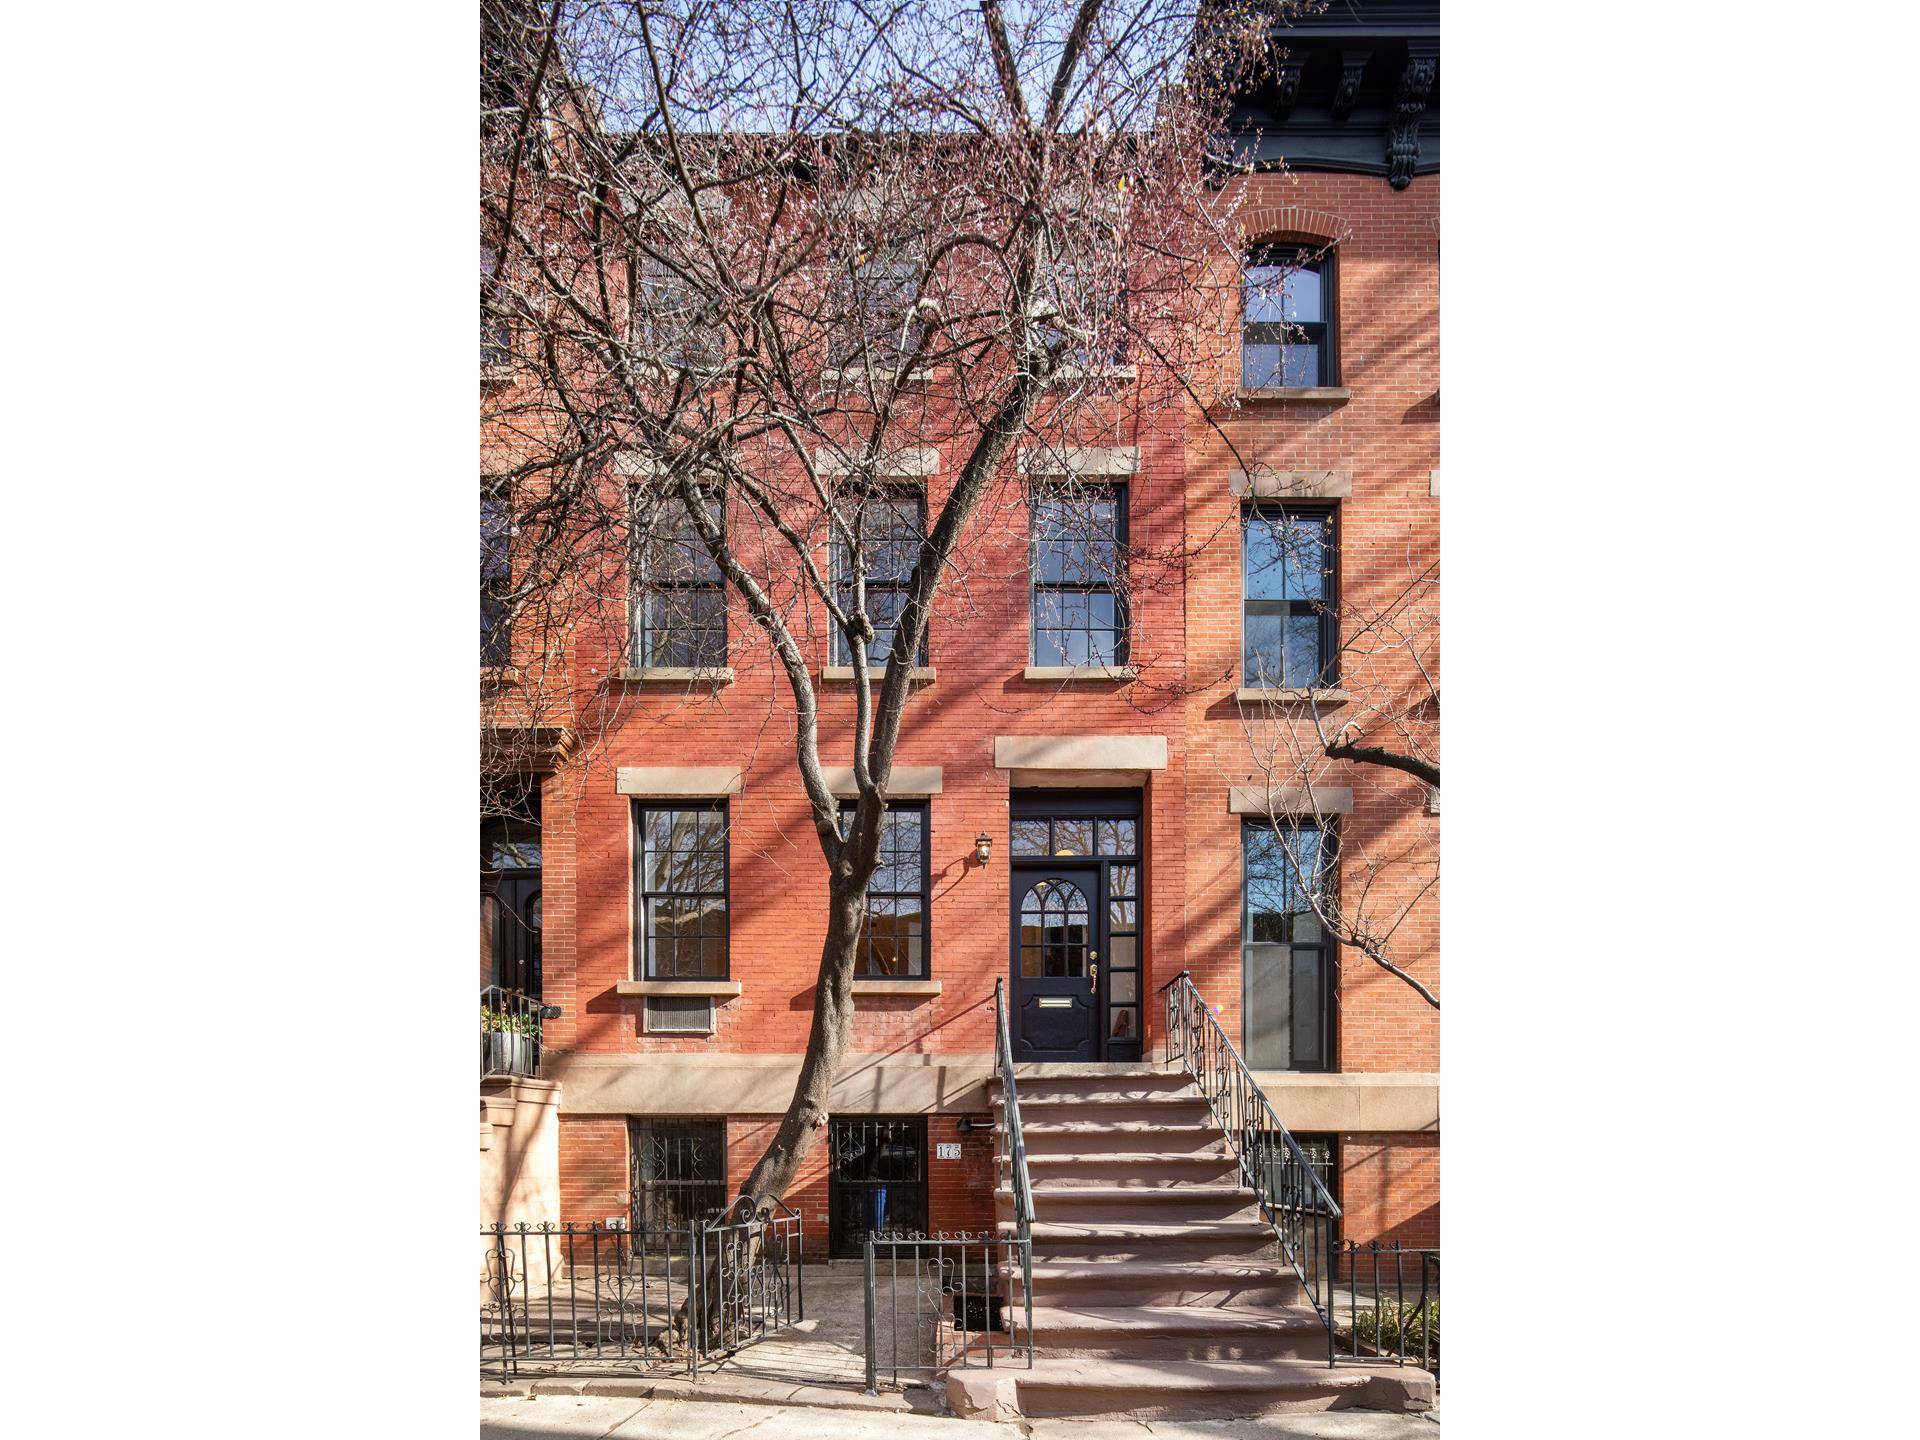 Welcome home to 175 Bergen Street, a stately home on one of the finest townhouse blocks Brooklyn has to offer in Boerum Hill's Historic District Ascend the classic stoop entry ...